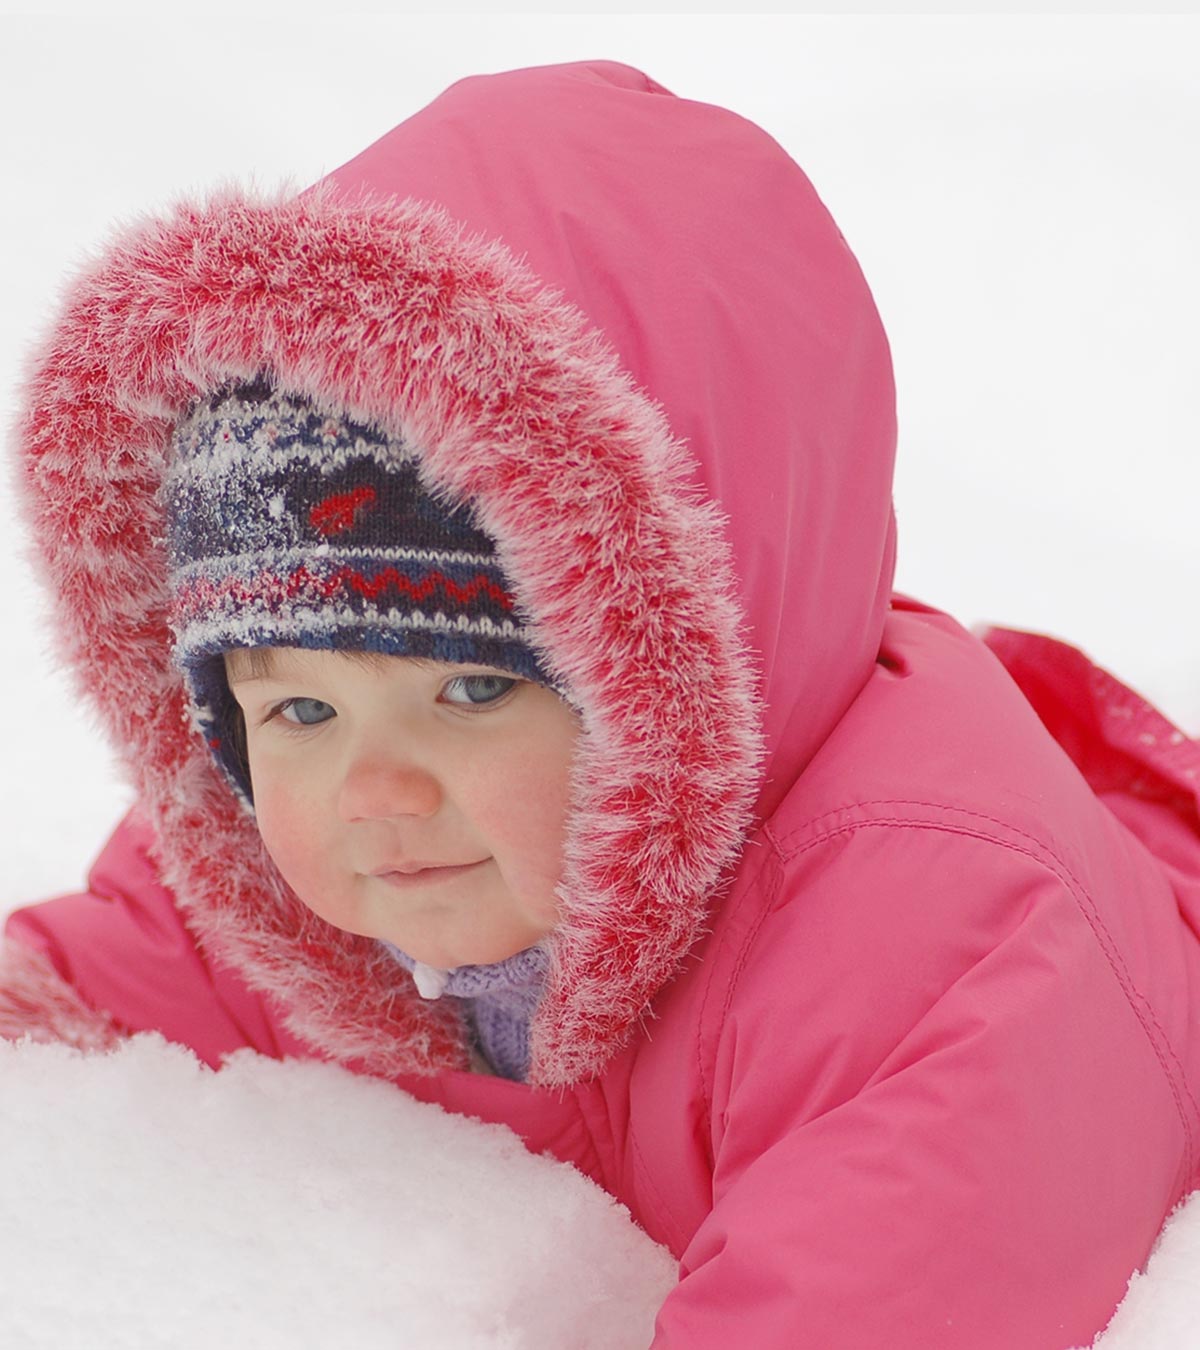 60 Baby Names Meaning Winter Or Snow To Add The Warmth